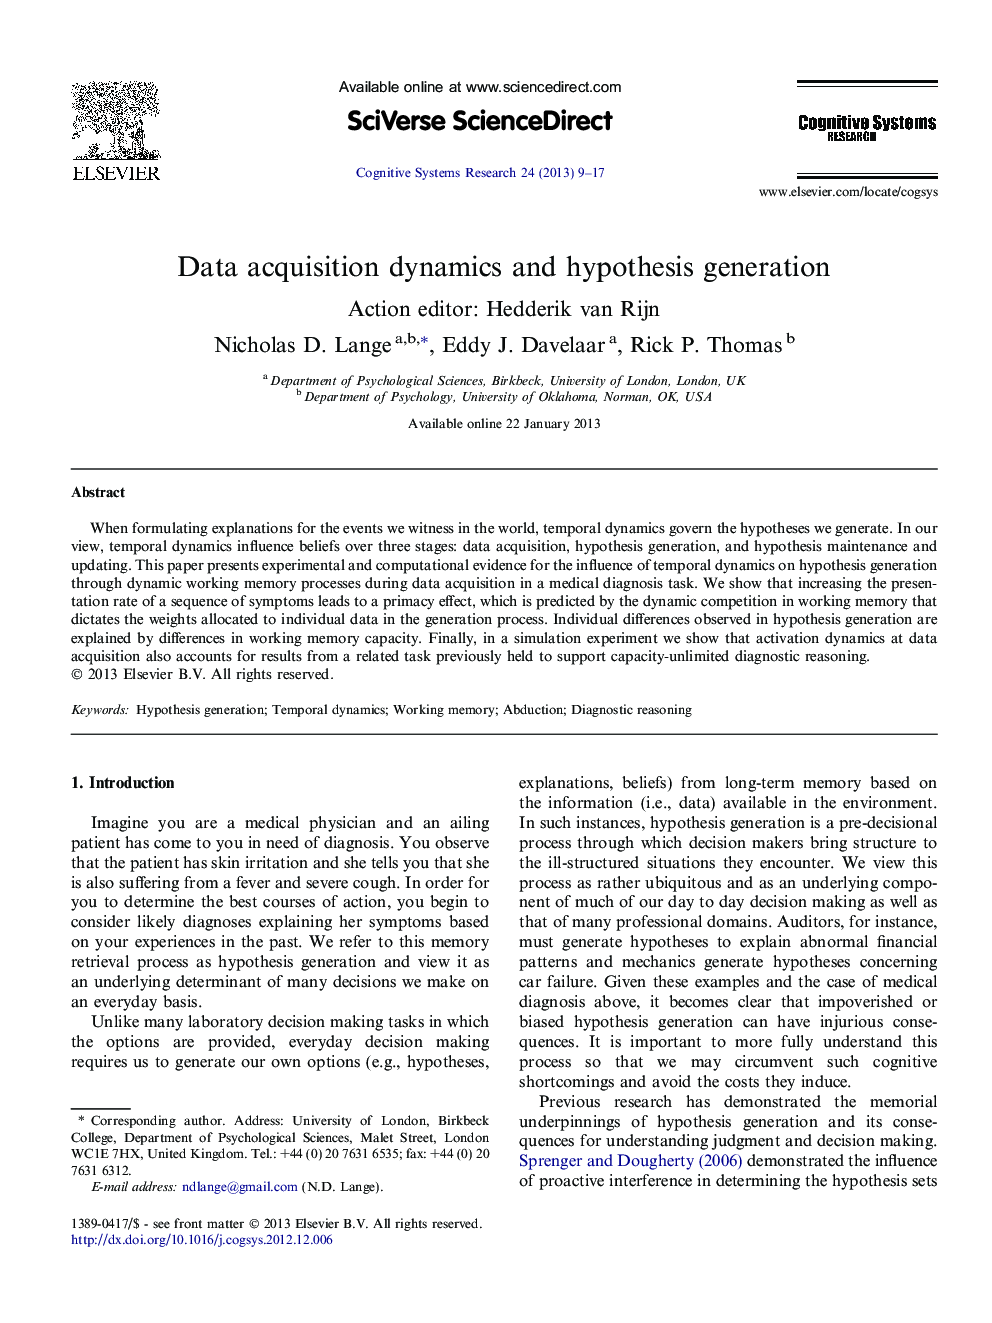 Data acquisition dynamics and hypothesis generation